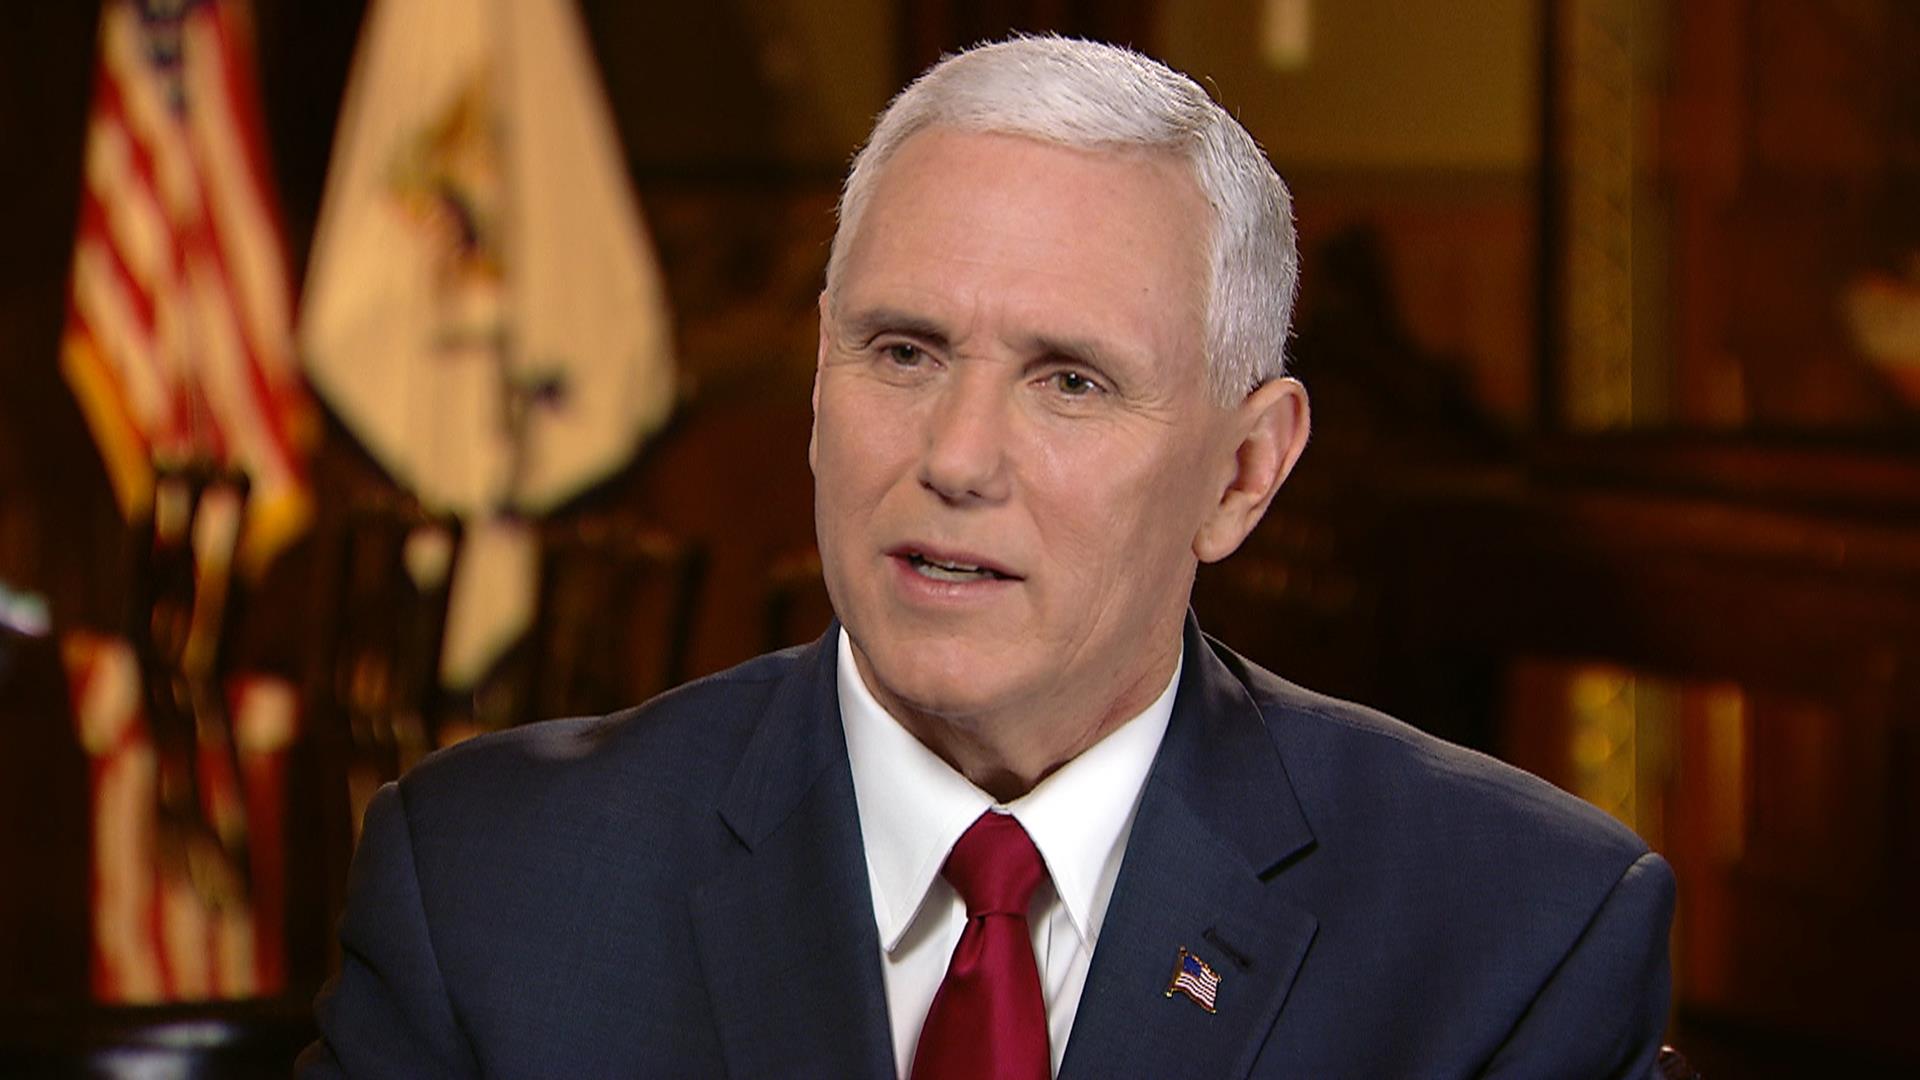 Mike Pence: The Trump I saw last night is the one I’ve seen all along